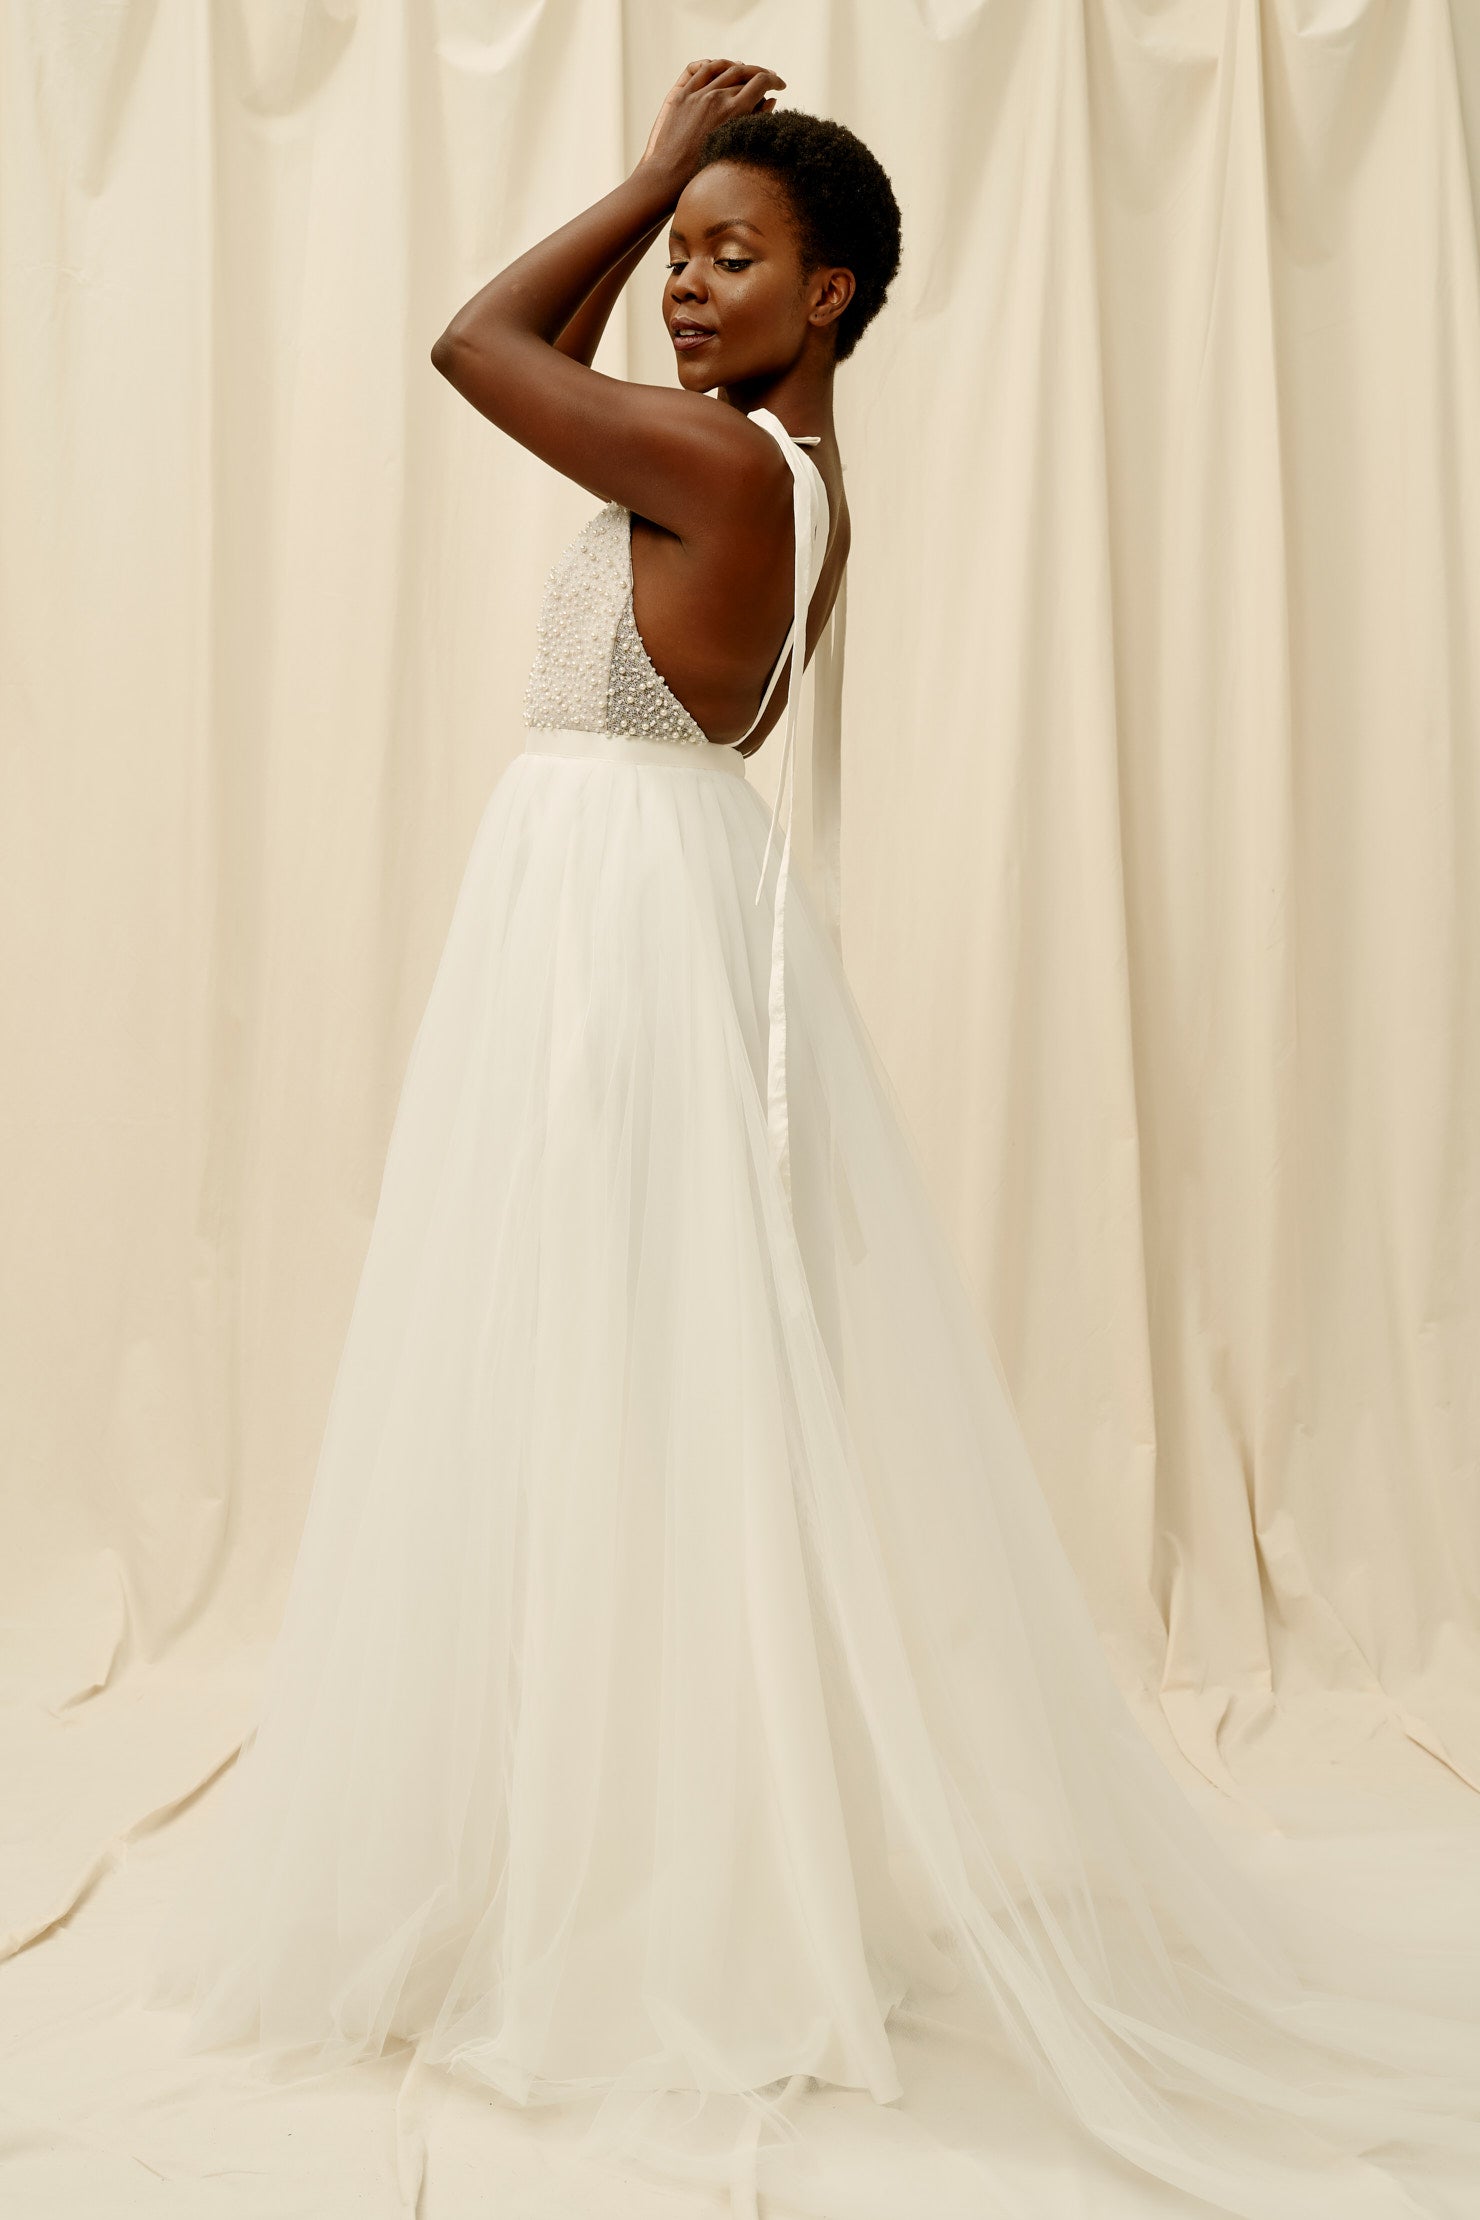 Backless wedding dress with a soft tulle skirt and shoulder tie straps